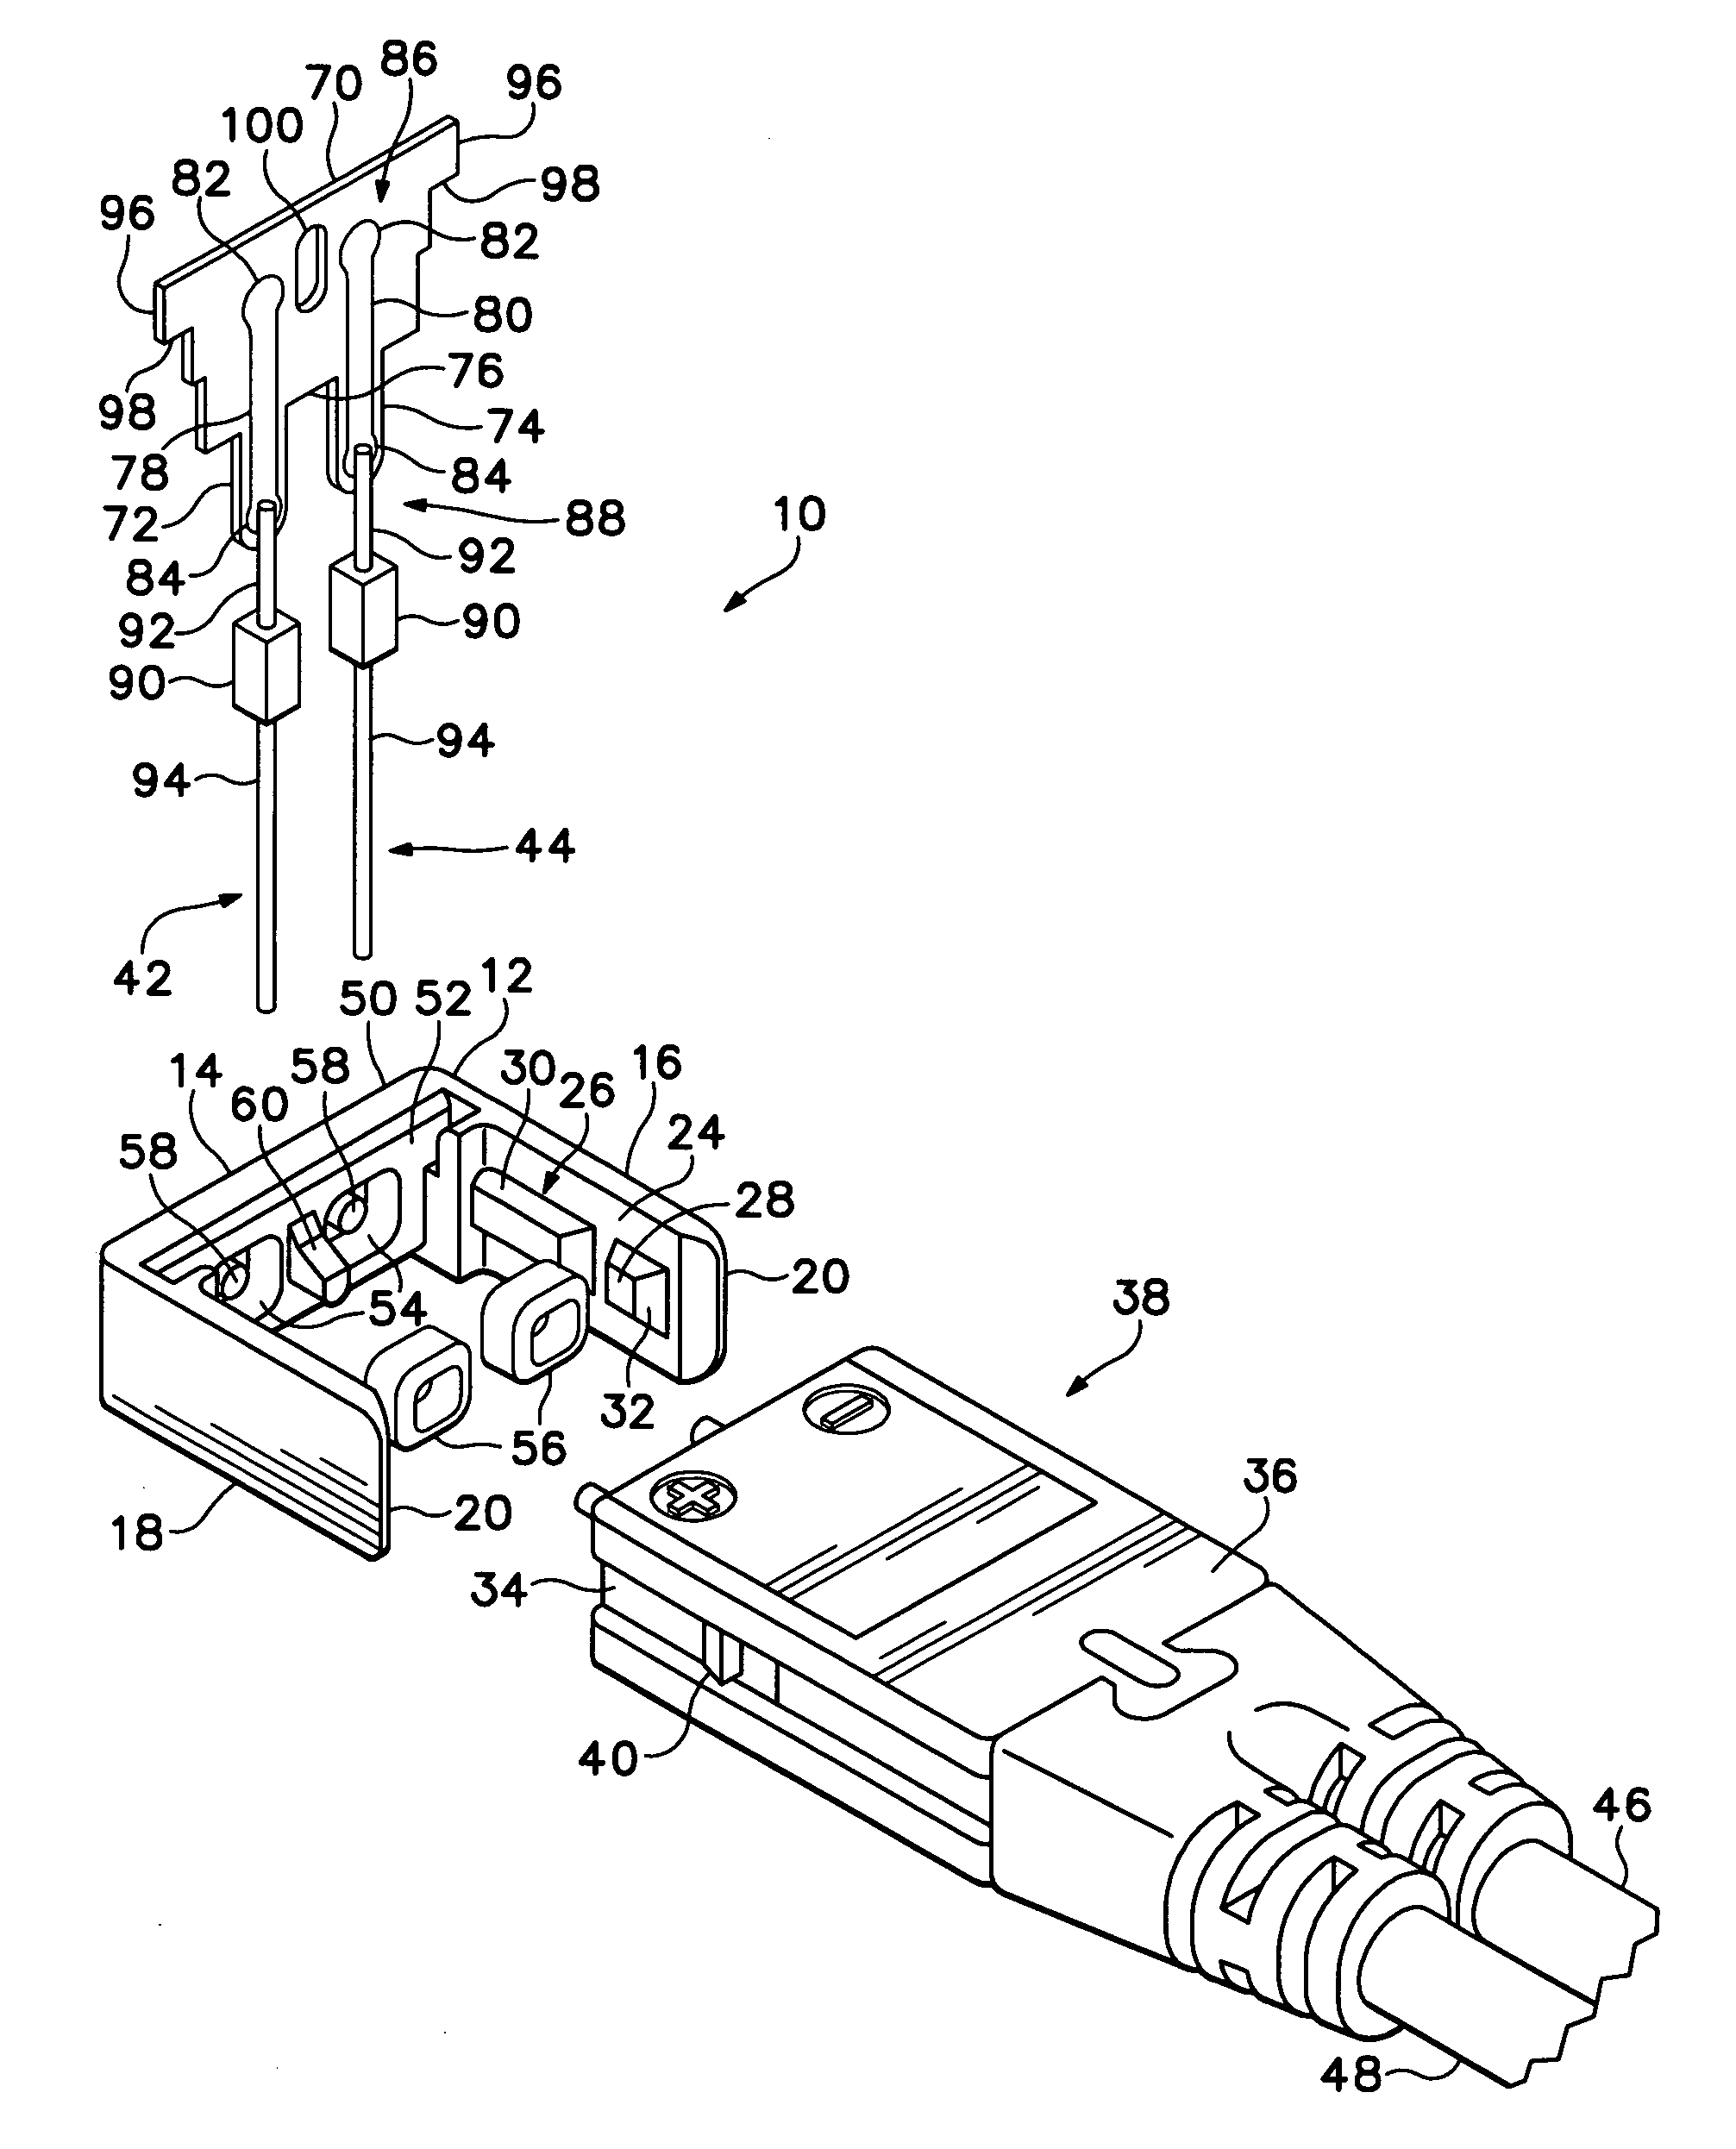 Attachable/detachable probing tip system for a measurement probing system